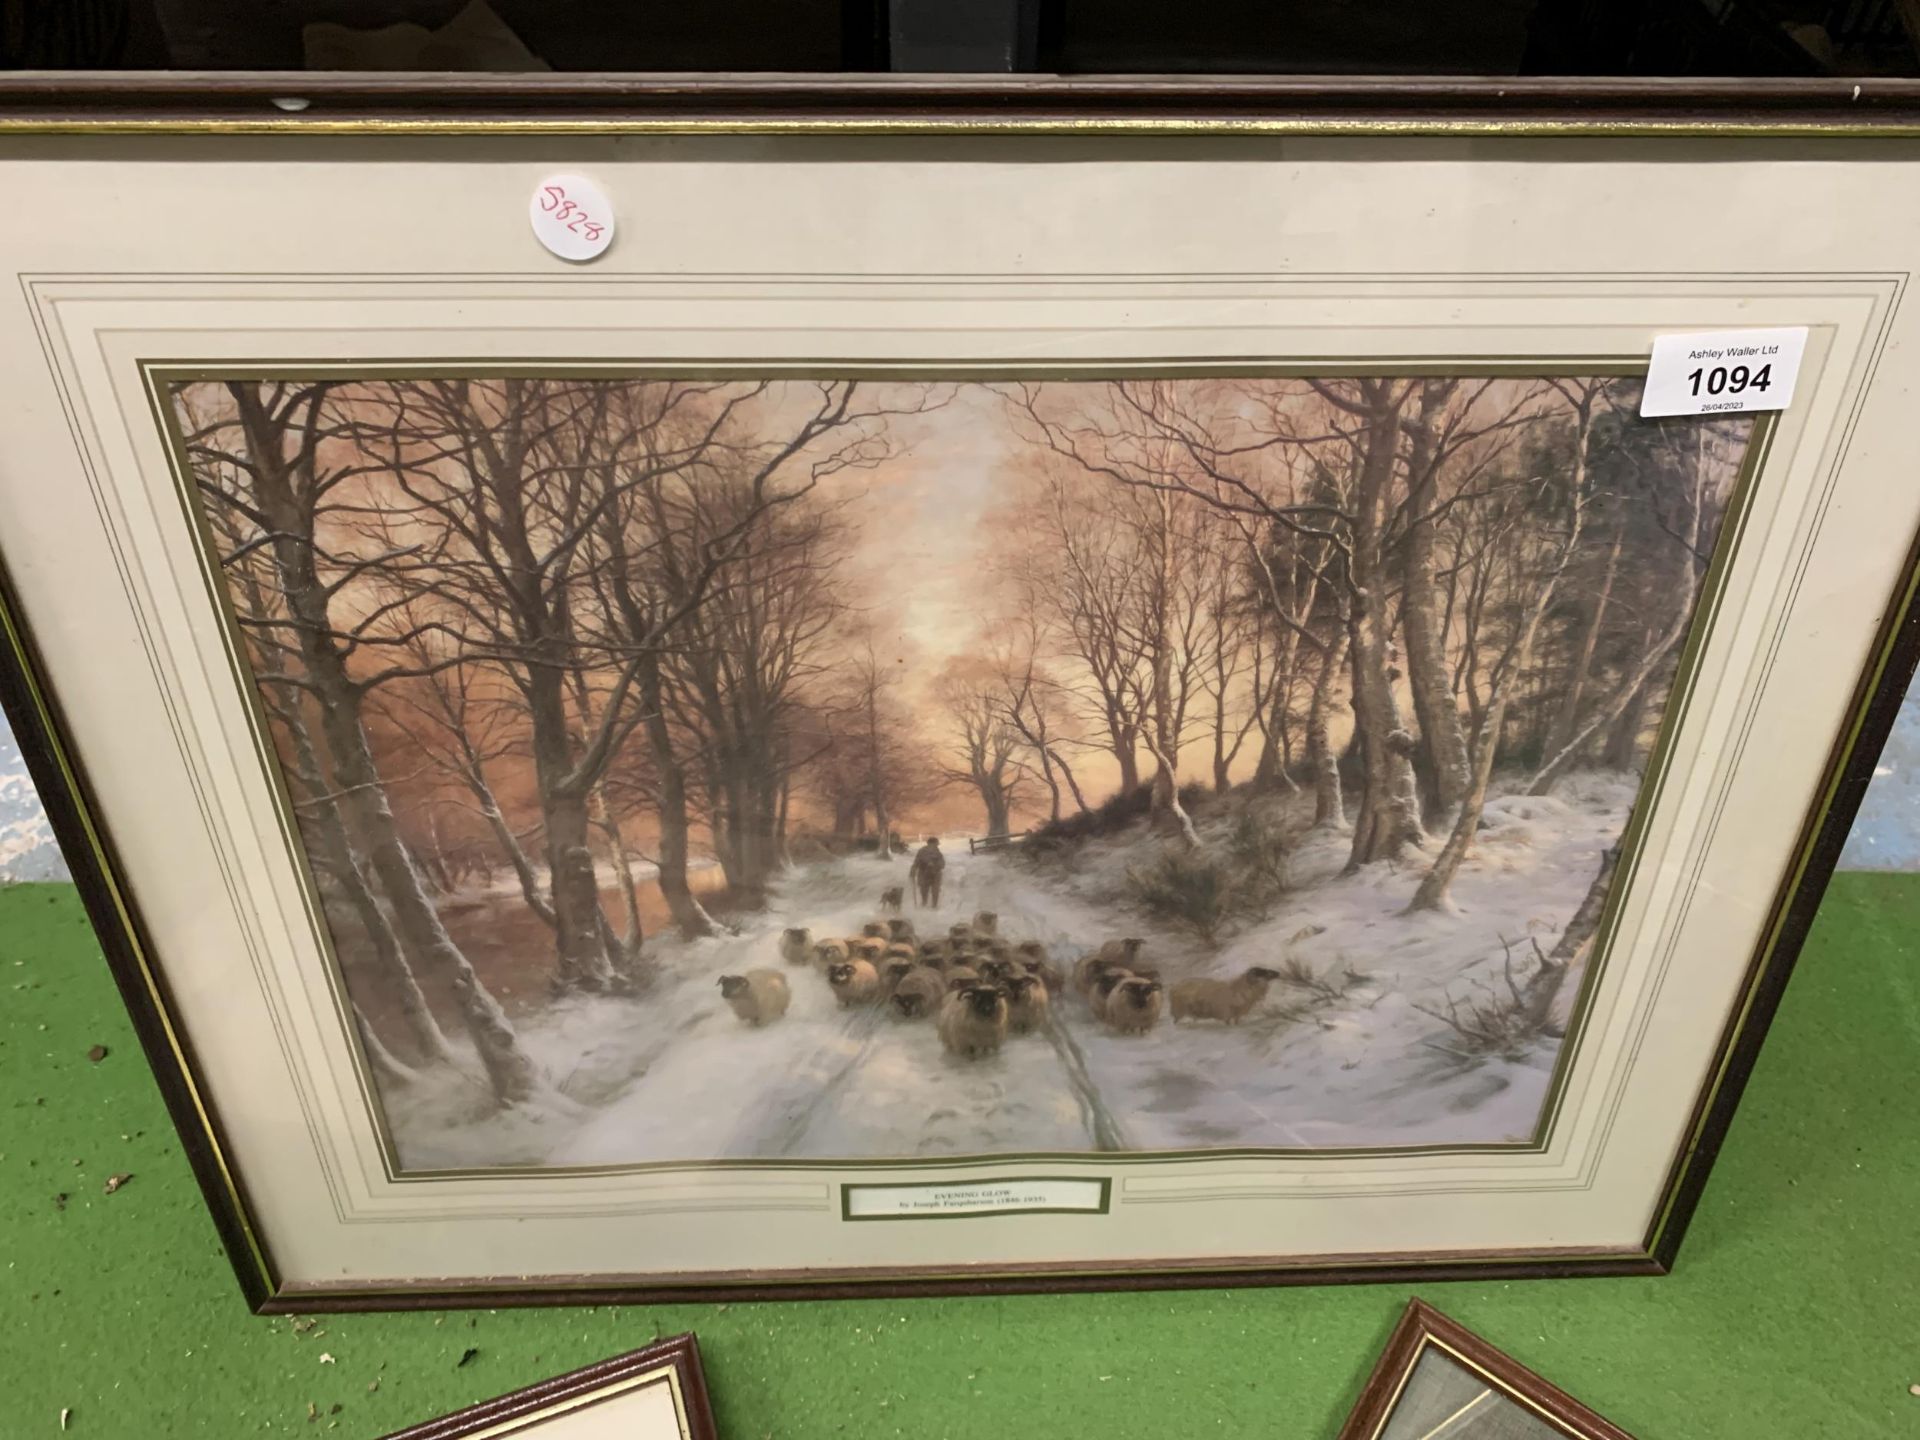 FOUR FRAMED PRINTS, TWO BY JOHN CONSTABLE, DANIEL SHERRIN AND JOSEPH FARQUHARSON - Image 4 of 5